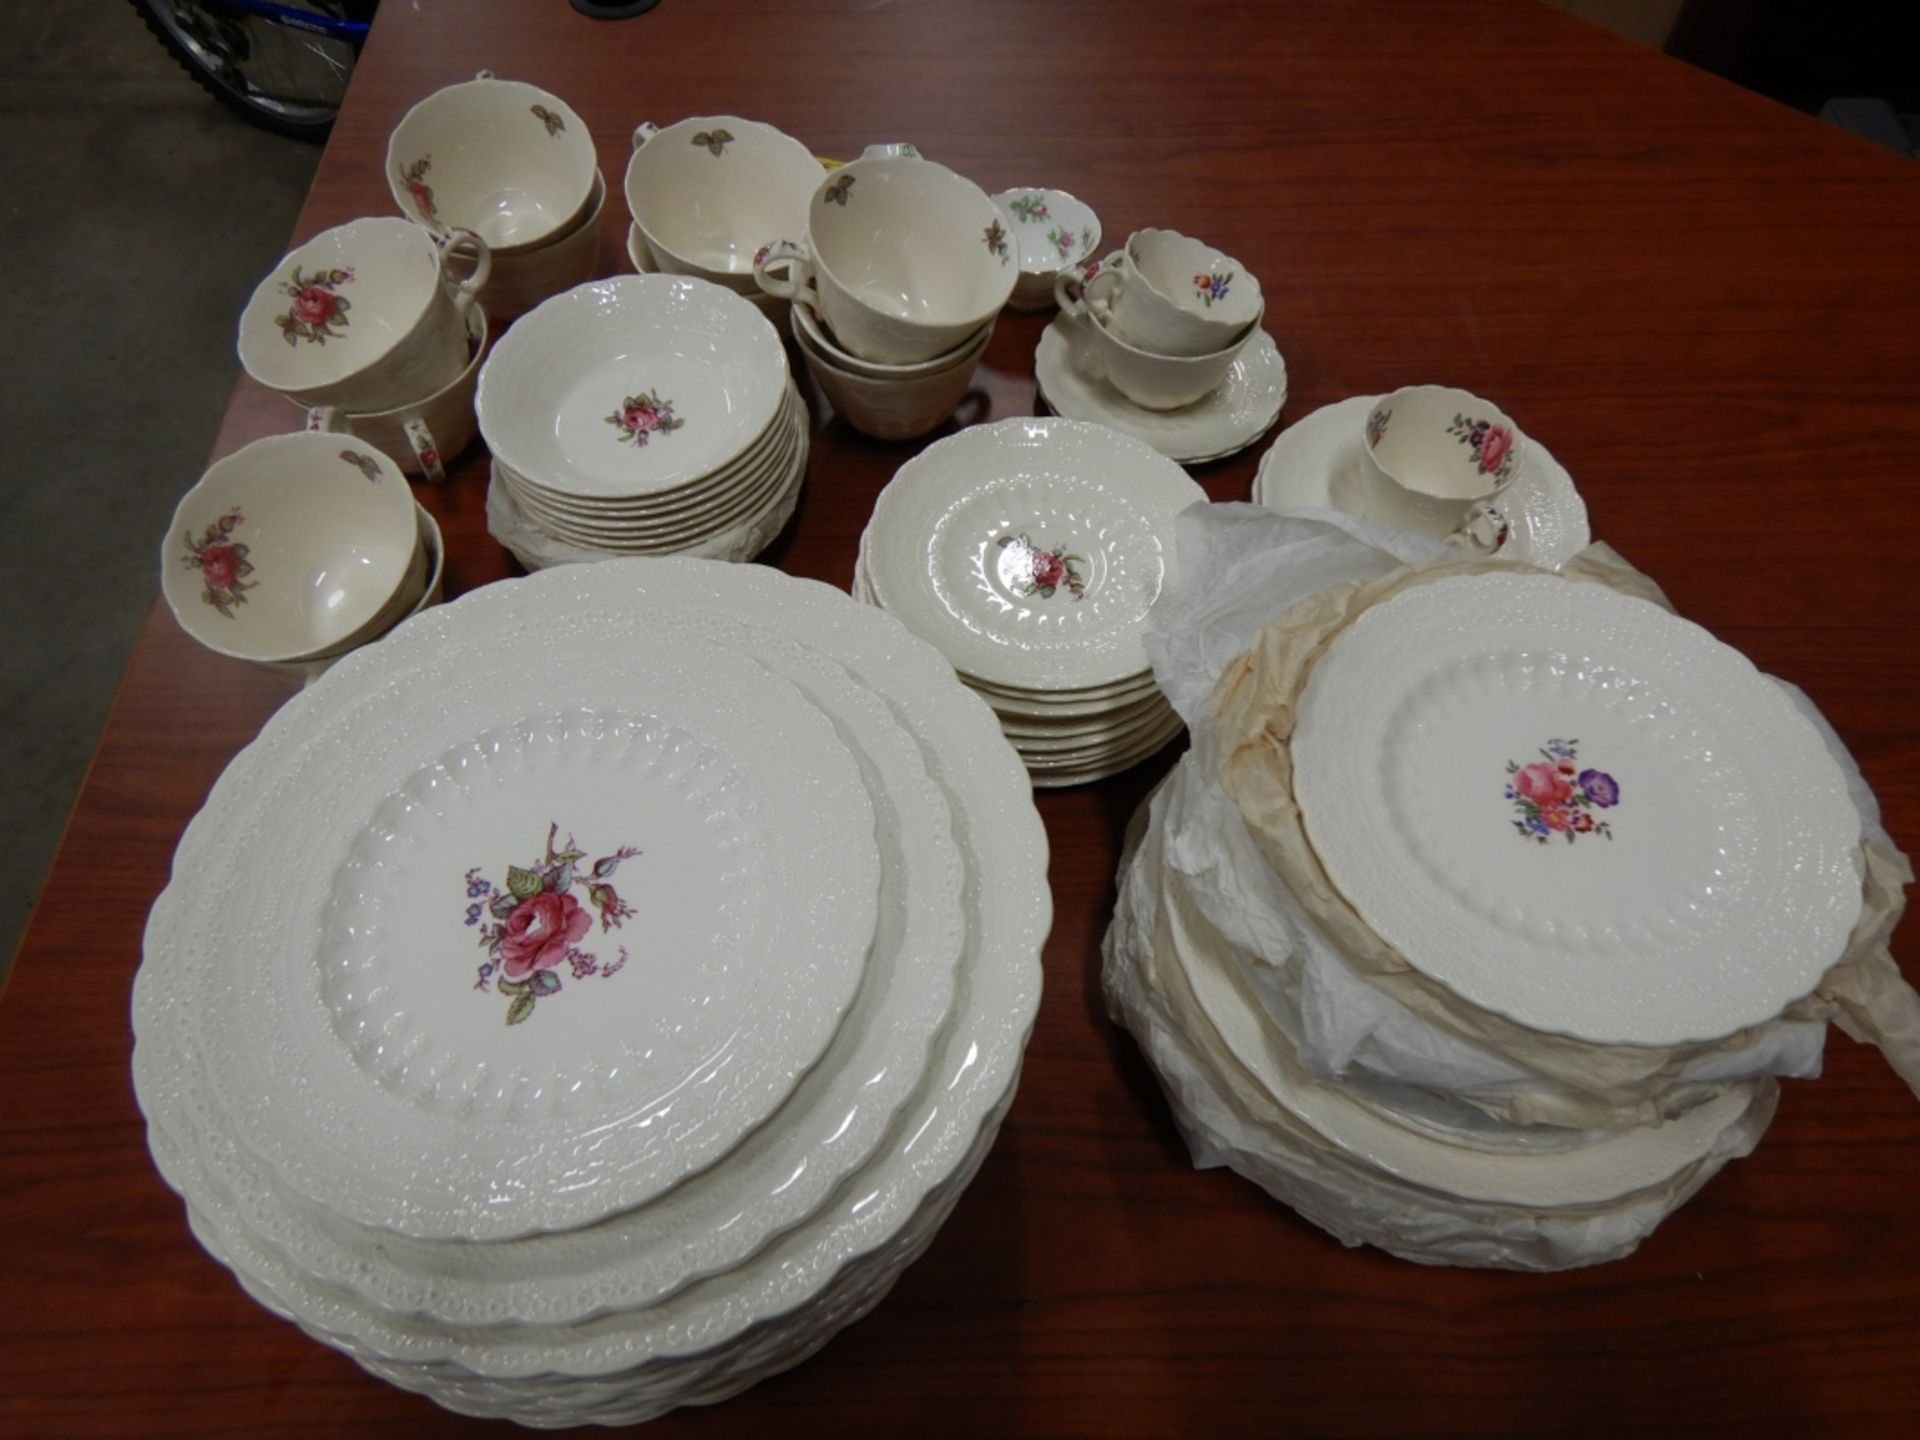 L/O SPODE BILLINGSLEY ROSE ENGLISH CHINA APPROX. 12 PLACE SETTINGS OF 12IN PLATES, 8IN SIDE - Image 2 of 4